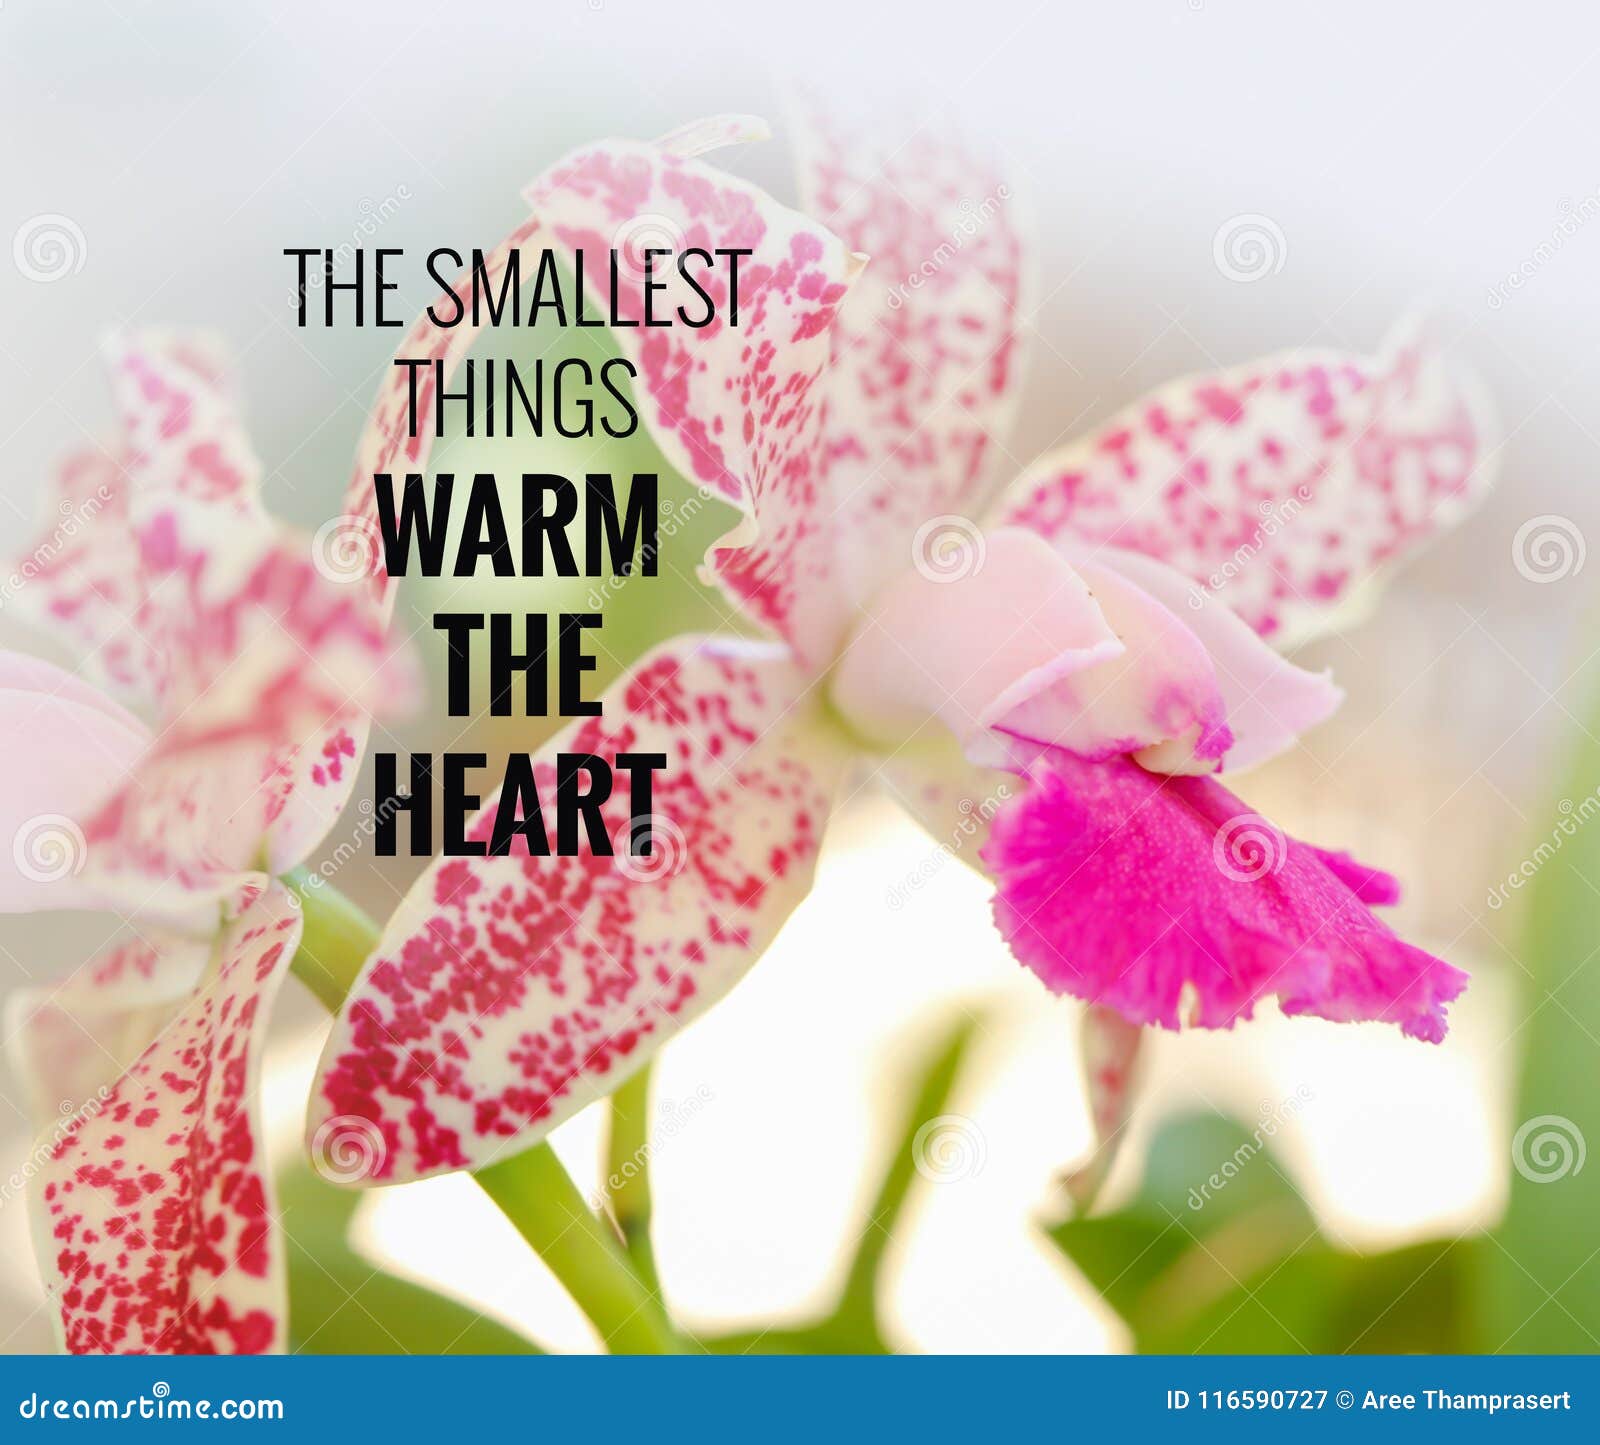 quote- the smallest things warm the heart